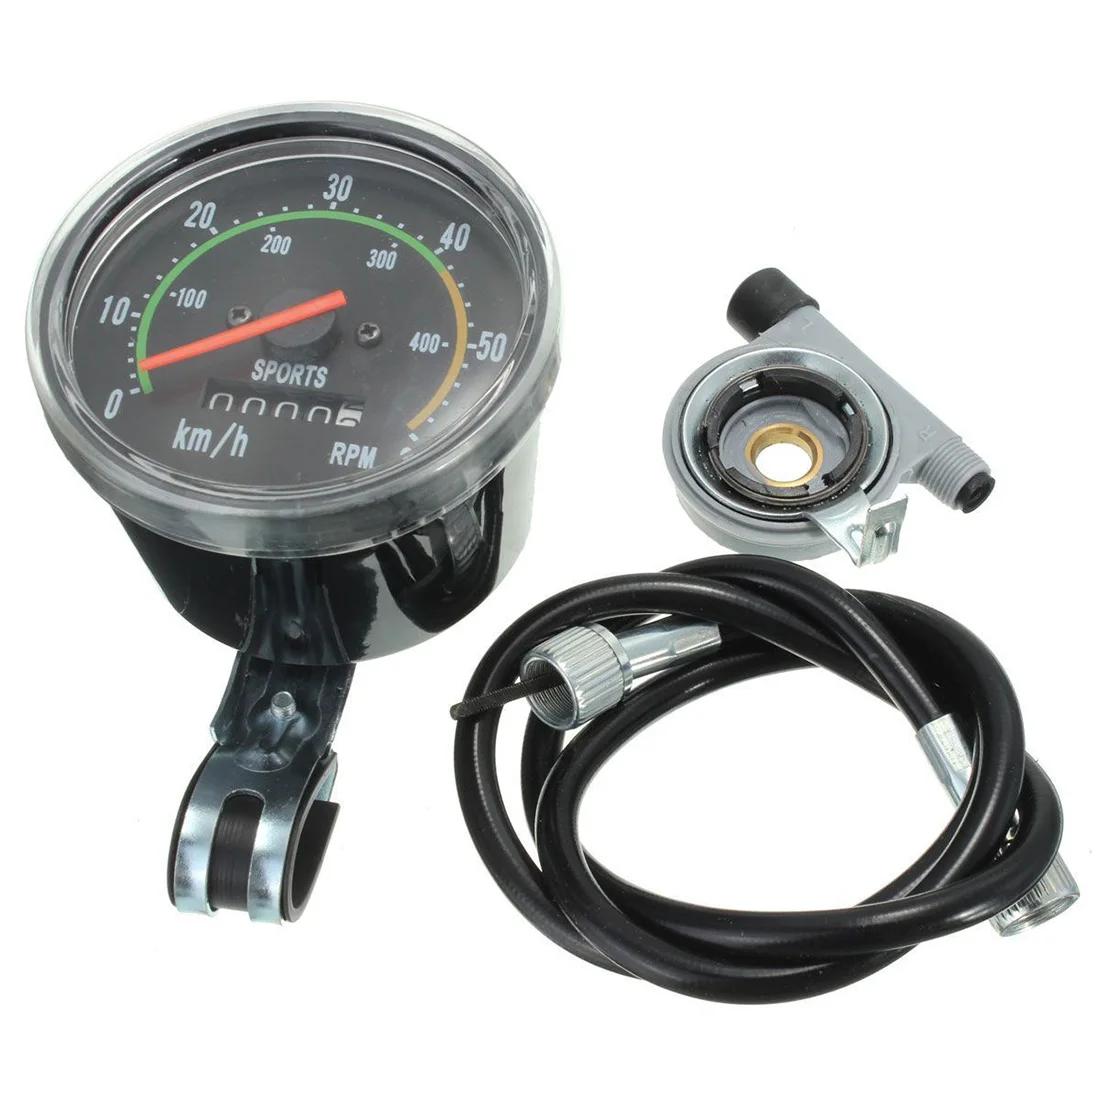 Mechanical Odometer Speedometer Resettable MPH For Bicycle Bike Motorcycle 